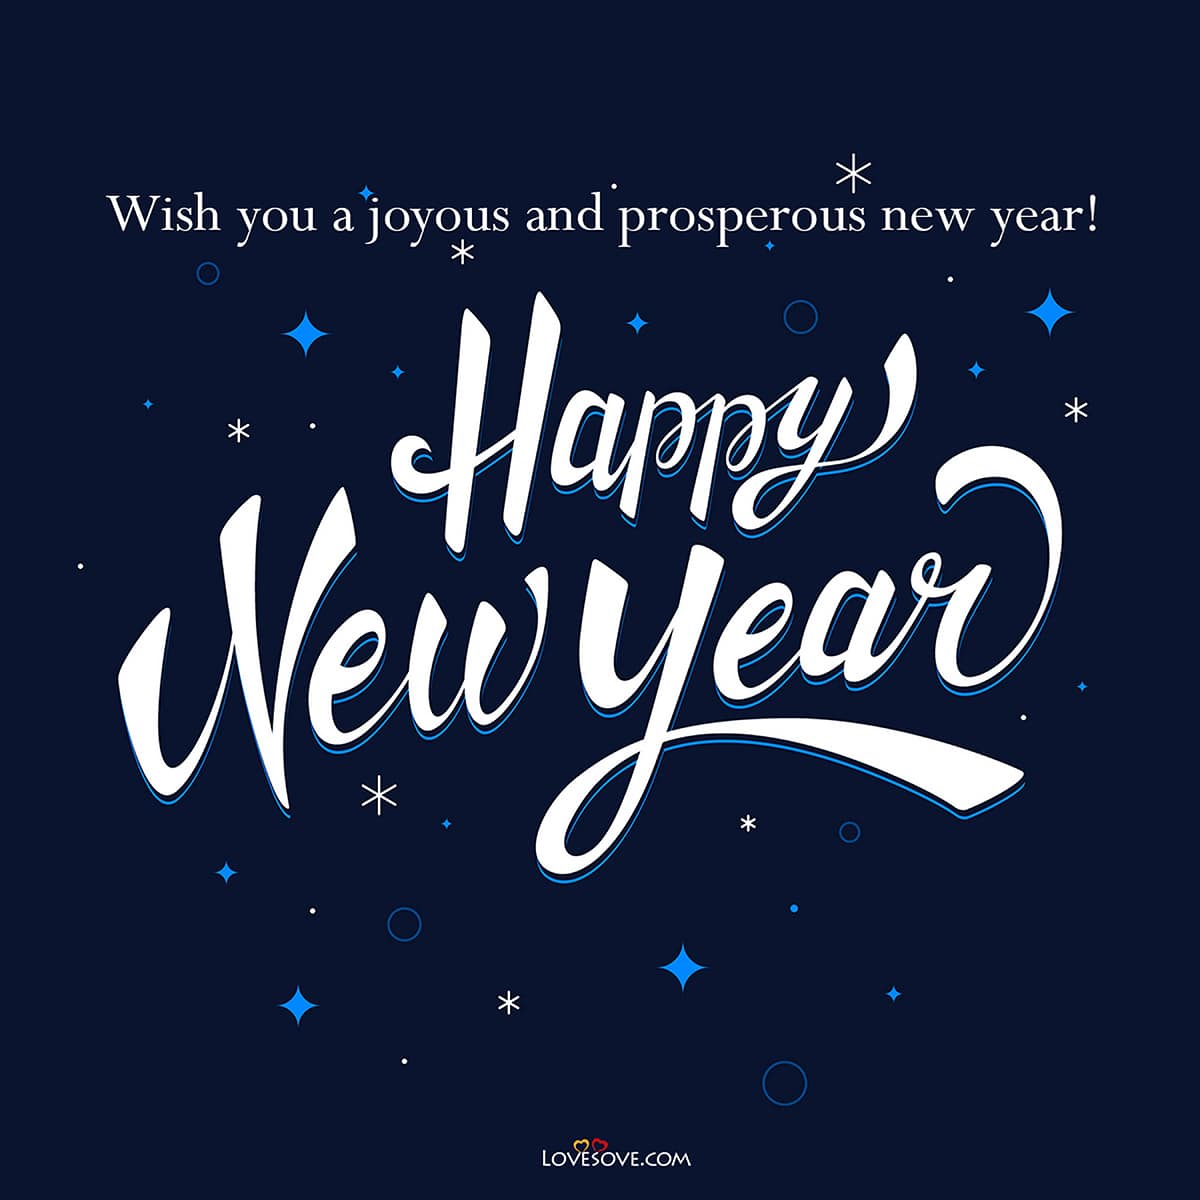  happy new year 2024 wishes in english, happy new year 2023 wishes text, happy new year 2024 wishes in english